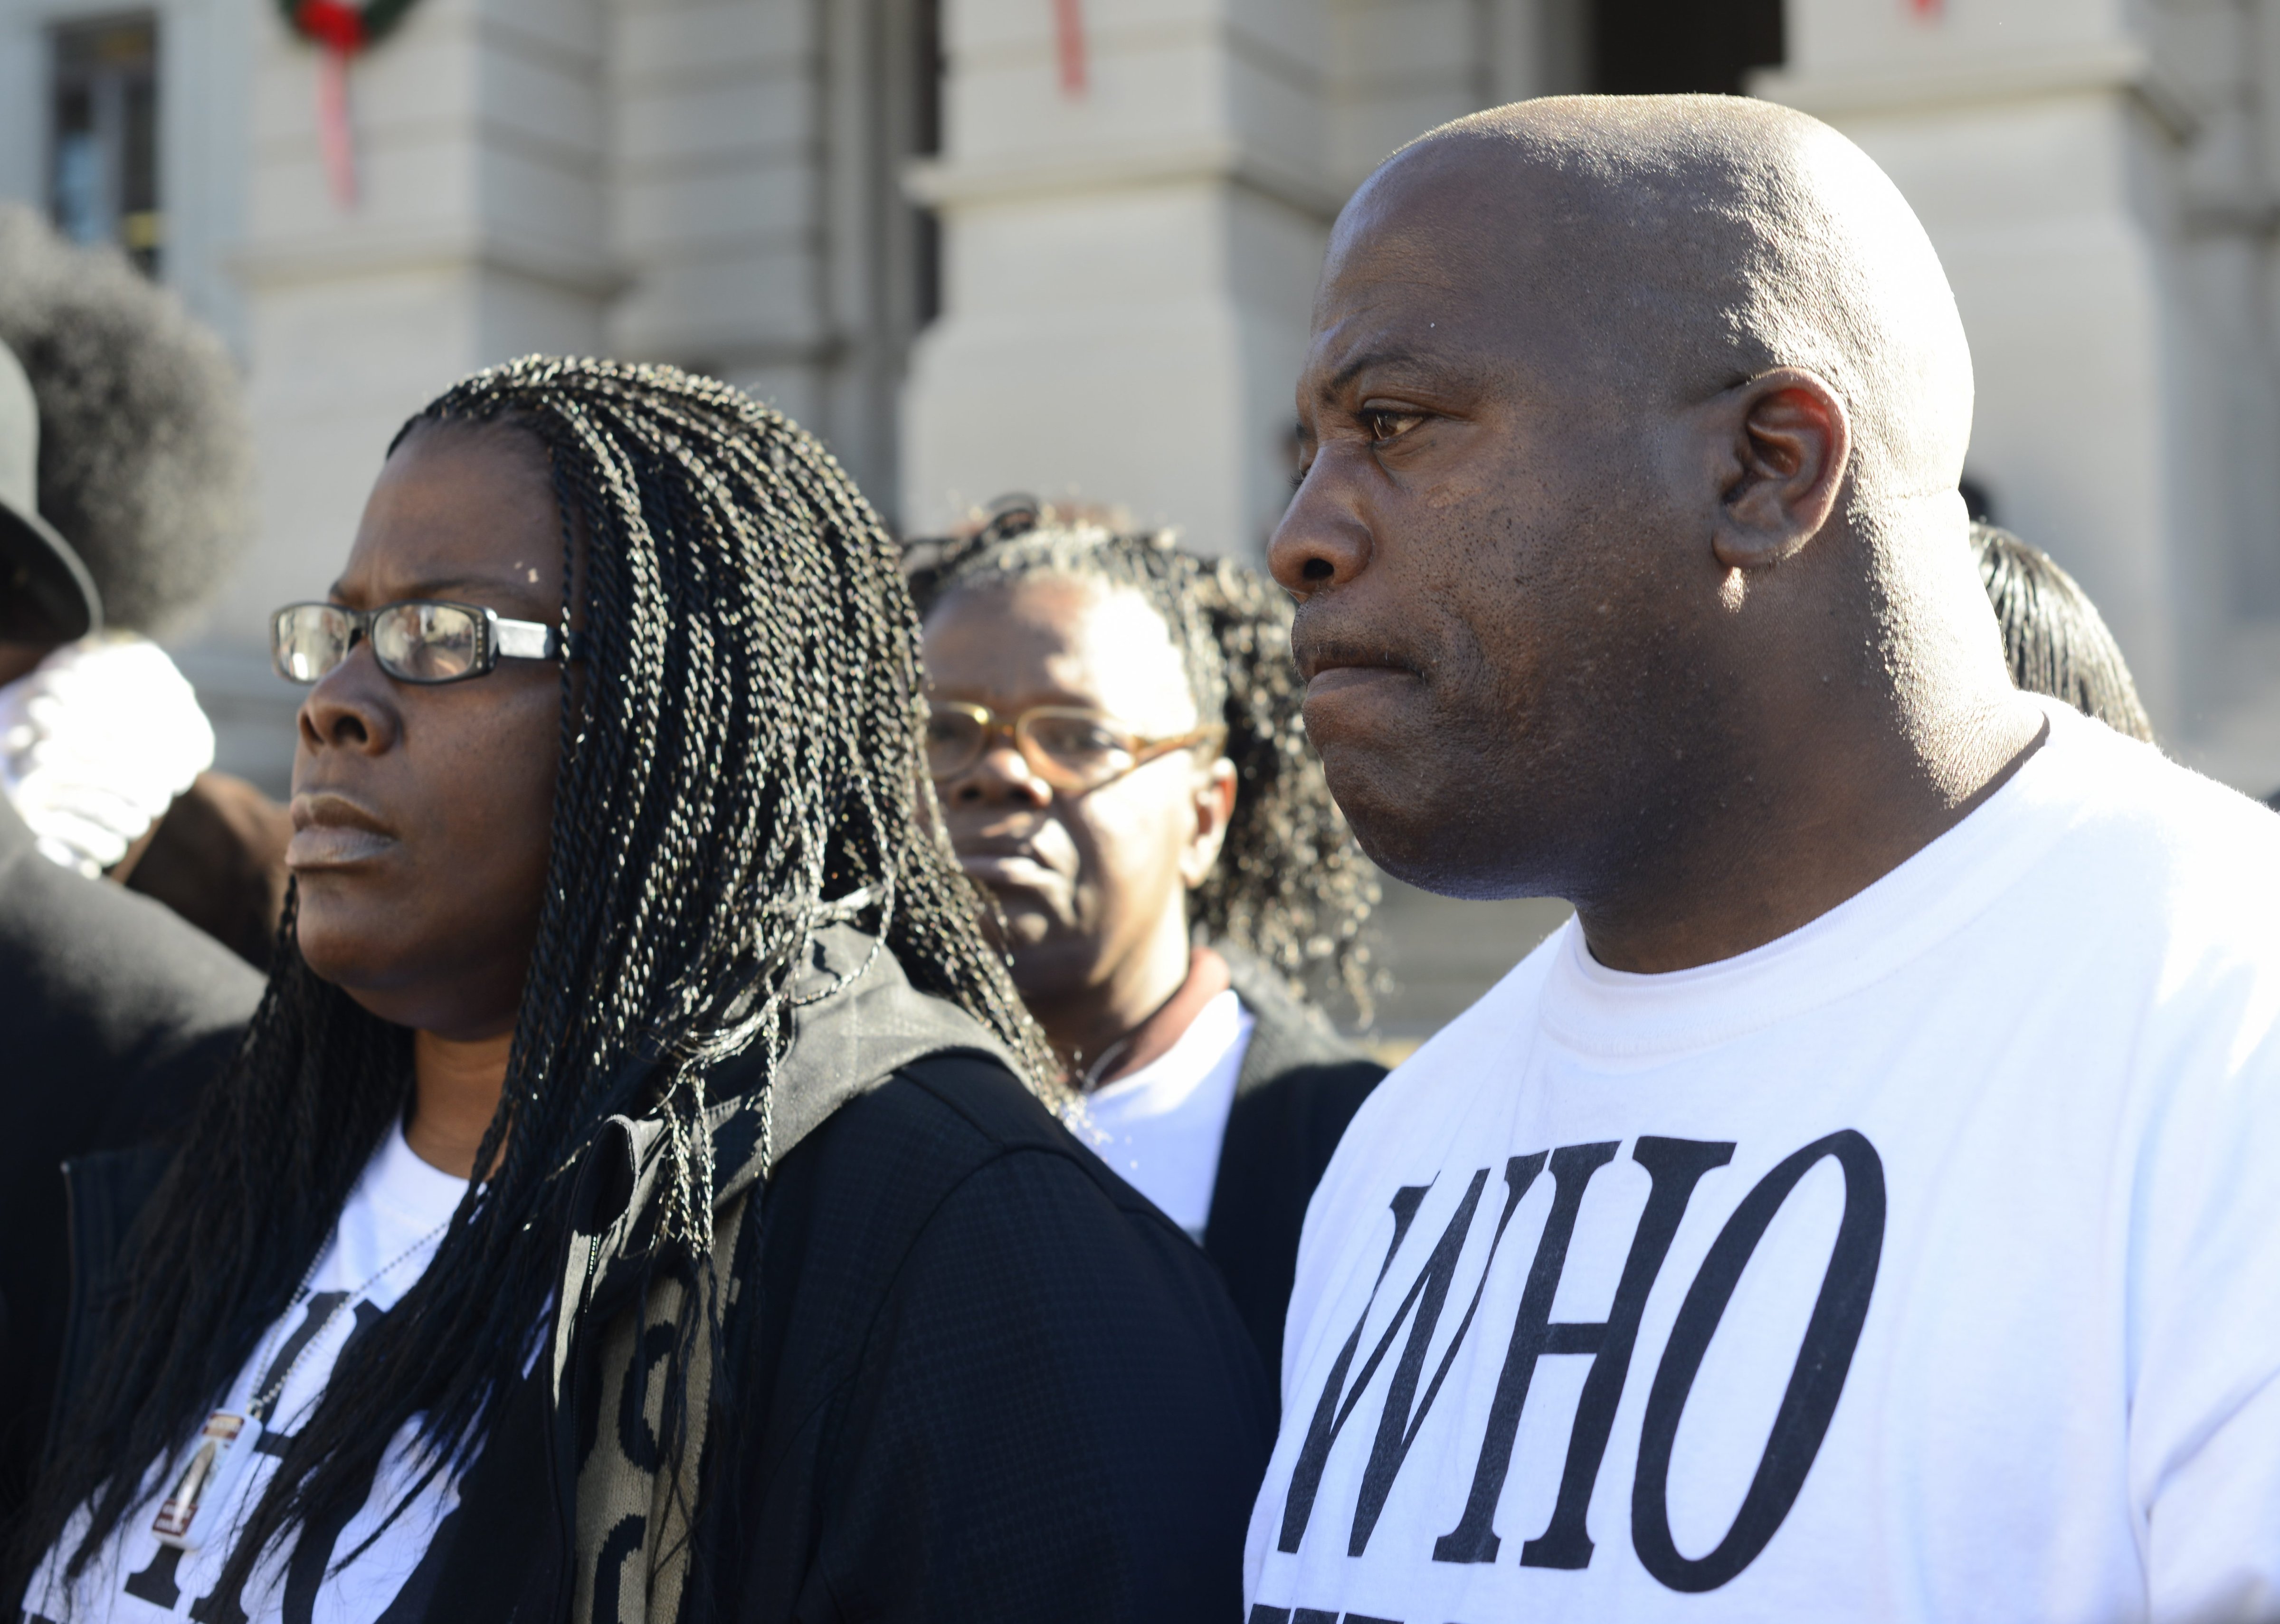 Jacqueline Johnson (left) and her husband Kenneth (right) participate in a rally on behalf of their dead son Kendrick Johnson at the Georgia State Capitol in Atlanta on  Dec. 11, 2013. (Erik S. Lesser—epa/Corbis)